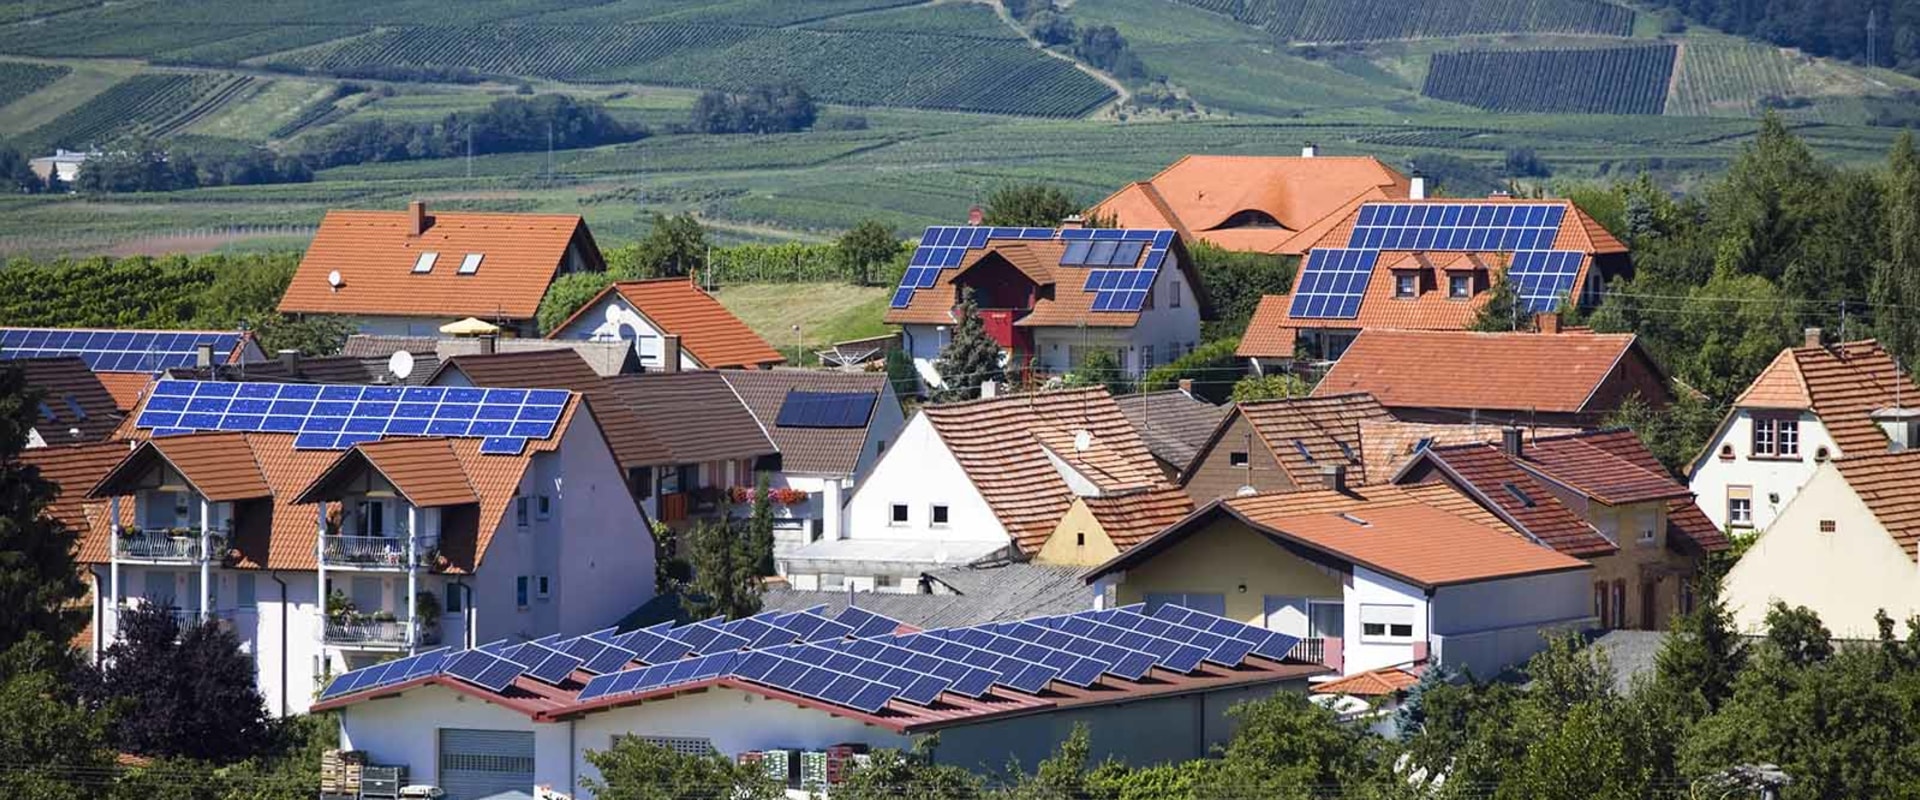 Is it possible to run a house completely on solar power?